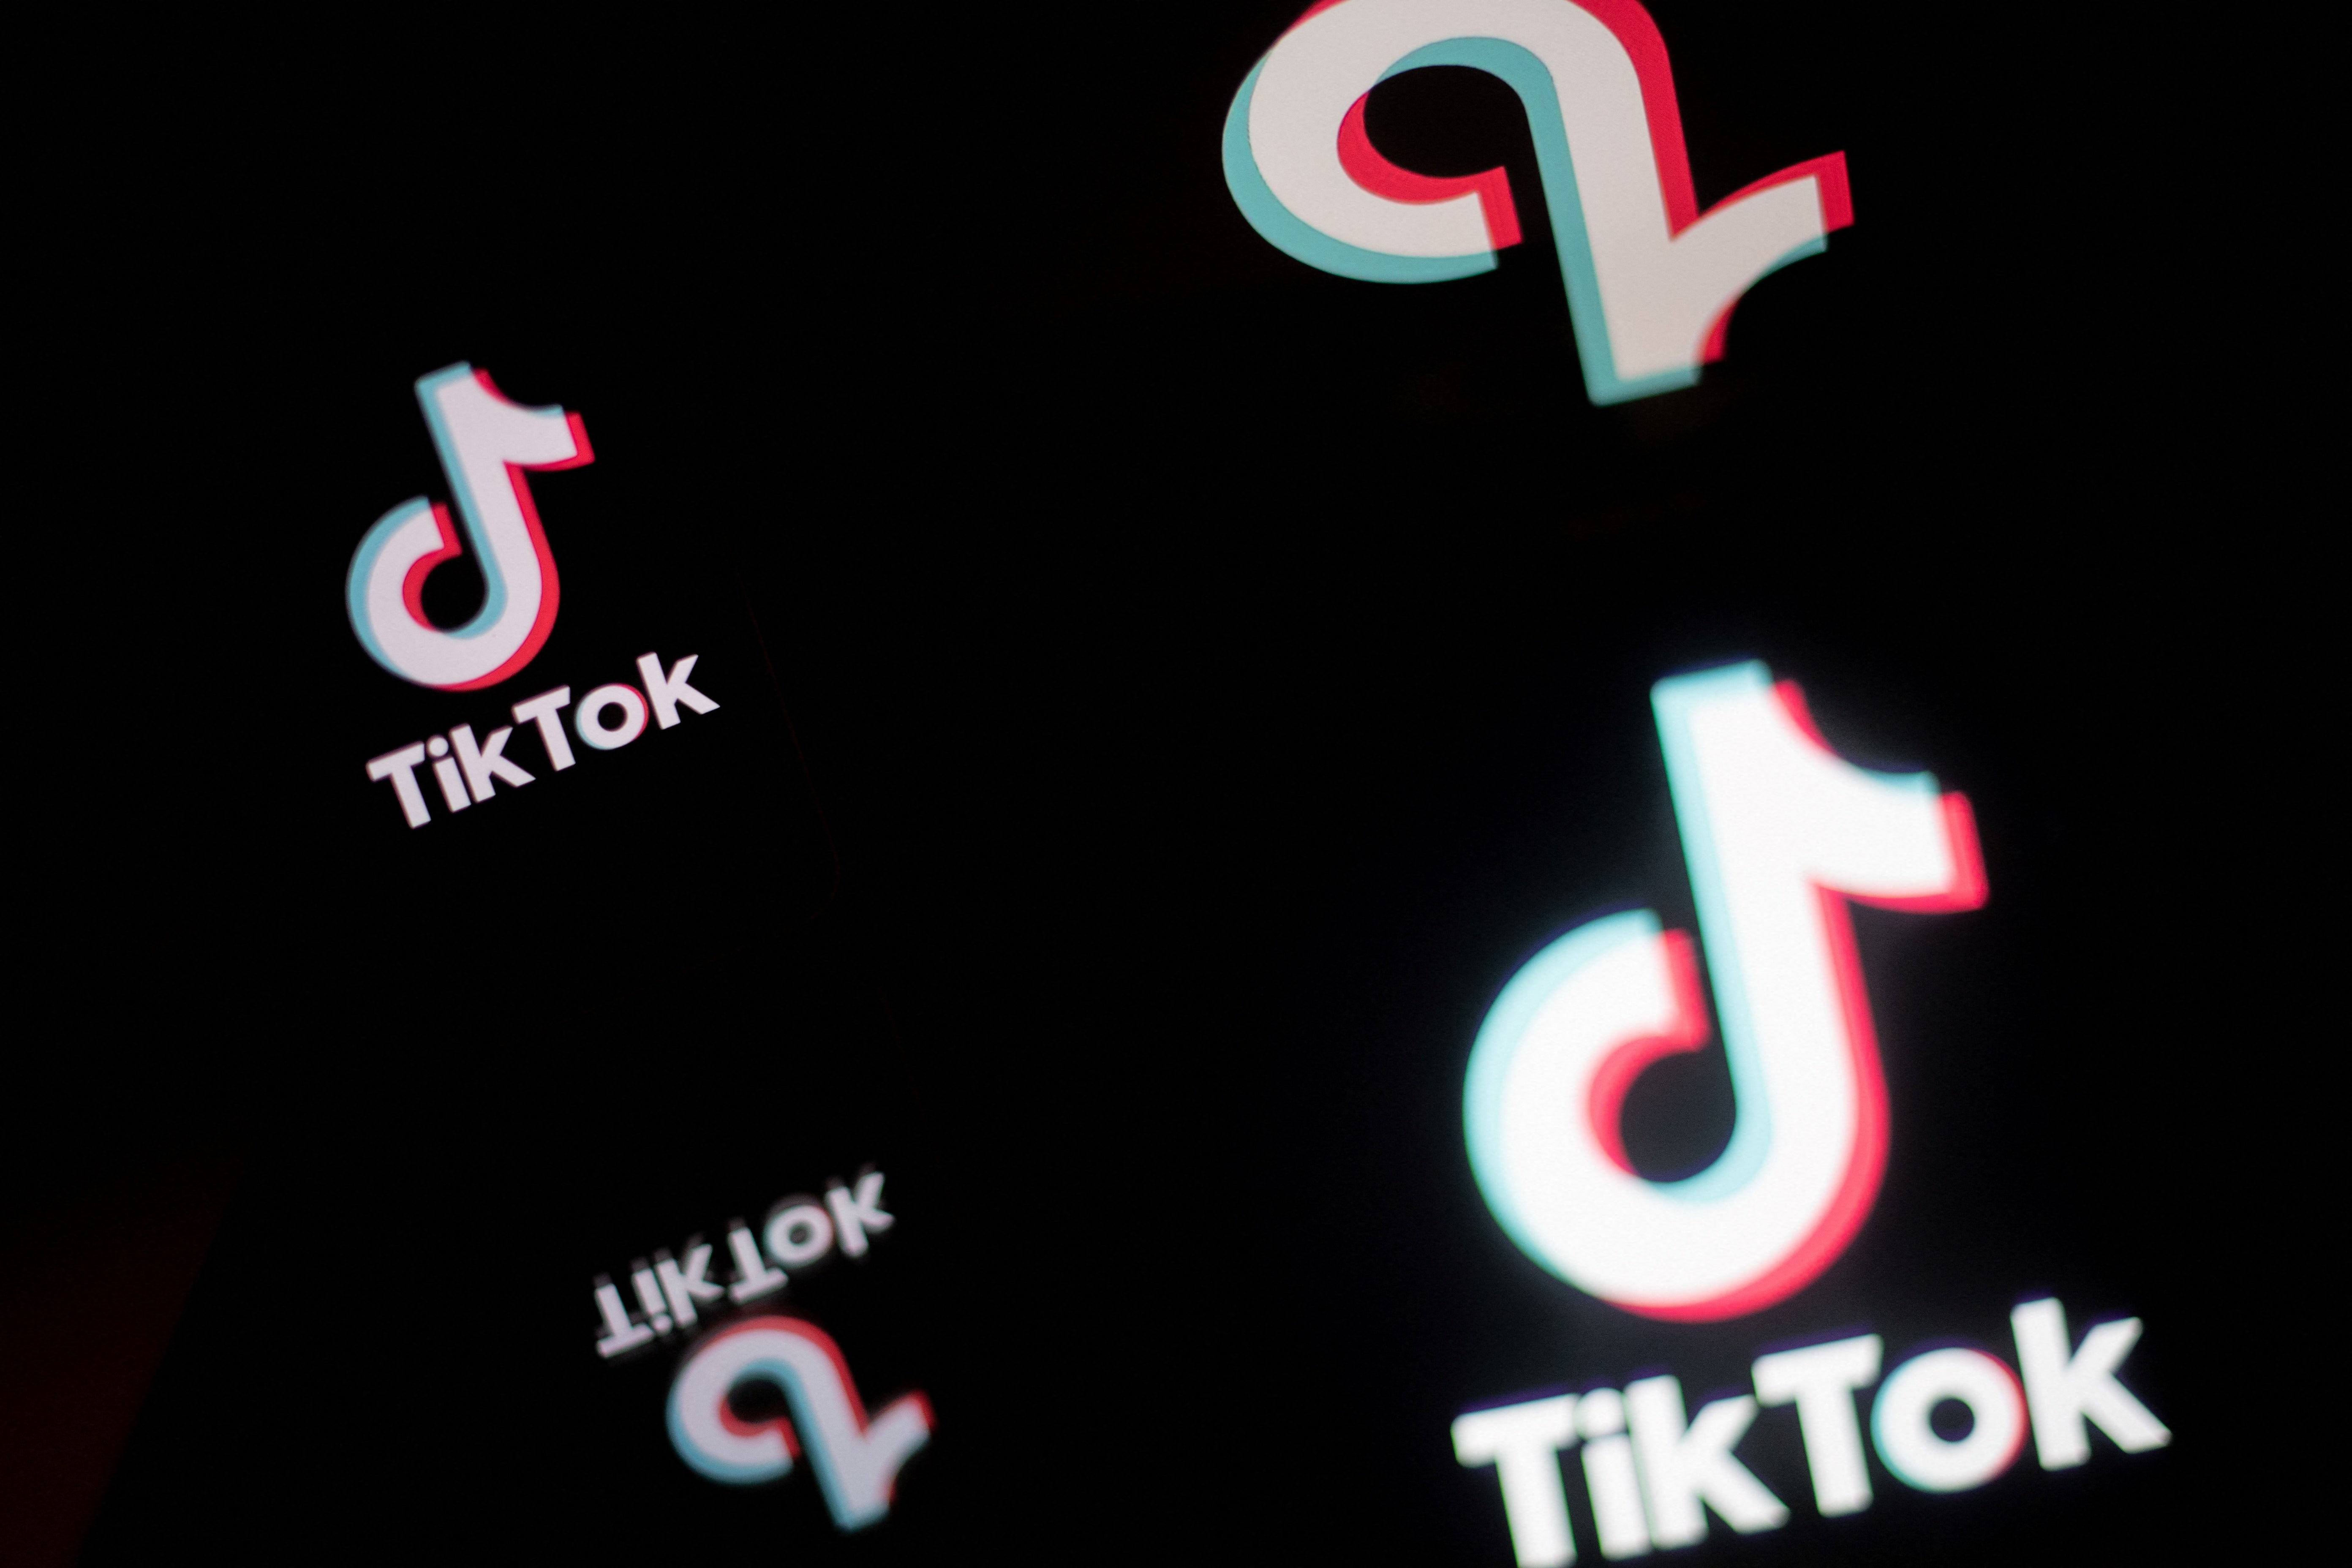 A picture taken on 21 January 2021 in Nantes, western France shows a smartphone with the logo of Chinese social network Tik Tok